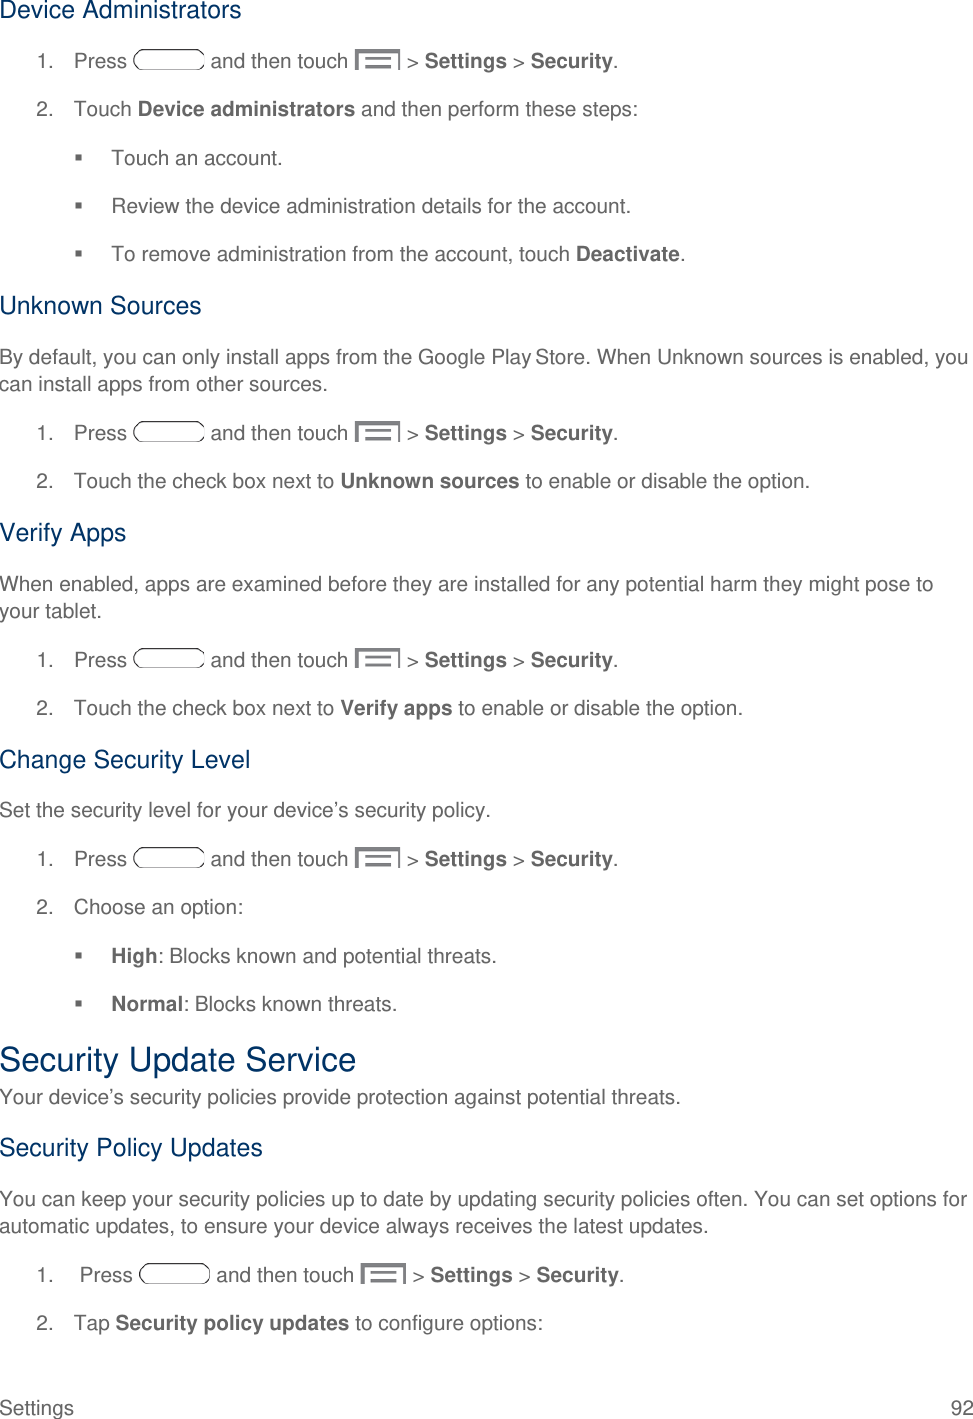  Device Administrators 1. Press   and then touch   &gt; Settings &gt; Security. 2. Touch Device administrators and then perform these steps:  Touch an account.  Review the device administration details for the account.  To remove administration from the account, touch Deactivate. Unknown Sources By default, you can only install apps from the Google Play Store. When Unknown sources is enabled, you can install apps from other sources. 1. Press   and then touch   &gt; Settings &gt; Security. 2. Touch the check box next to Unknown sources to enable or disable the option. Verify Apps When enabled, apps are examined before they are installed for any potential harm they might pose to your tablet.  1. Press   and then touch   &gt; Settings &gt; Security. 2. Touch the check box next to Verify apps to enable or disable the option. Change Security Level Set the security level for your device’s security policy. 1. Press   and then touch   &gt; Settings &gt; Security. 2. Choose an option:   High: Blocks known and potential threats.  Normal: Blocks known threats. Security Update Service Your device’s security policies provide protection against potential threats.  Security Policy Updates You can keep your security policies up to date by updating security policies often. You can set options for automatic updates, to ensure your device always receives the latest updates. 1.   Press   and then touch   &gt; Settings &gt; Security. 2. Tap Security policy updates to configure options: Settings 92 